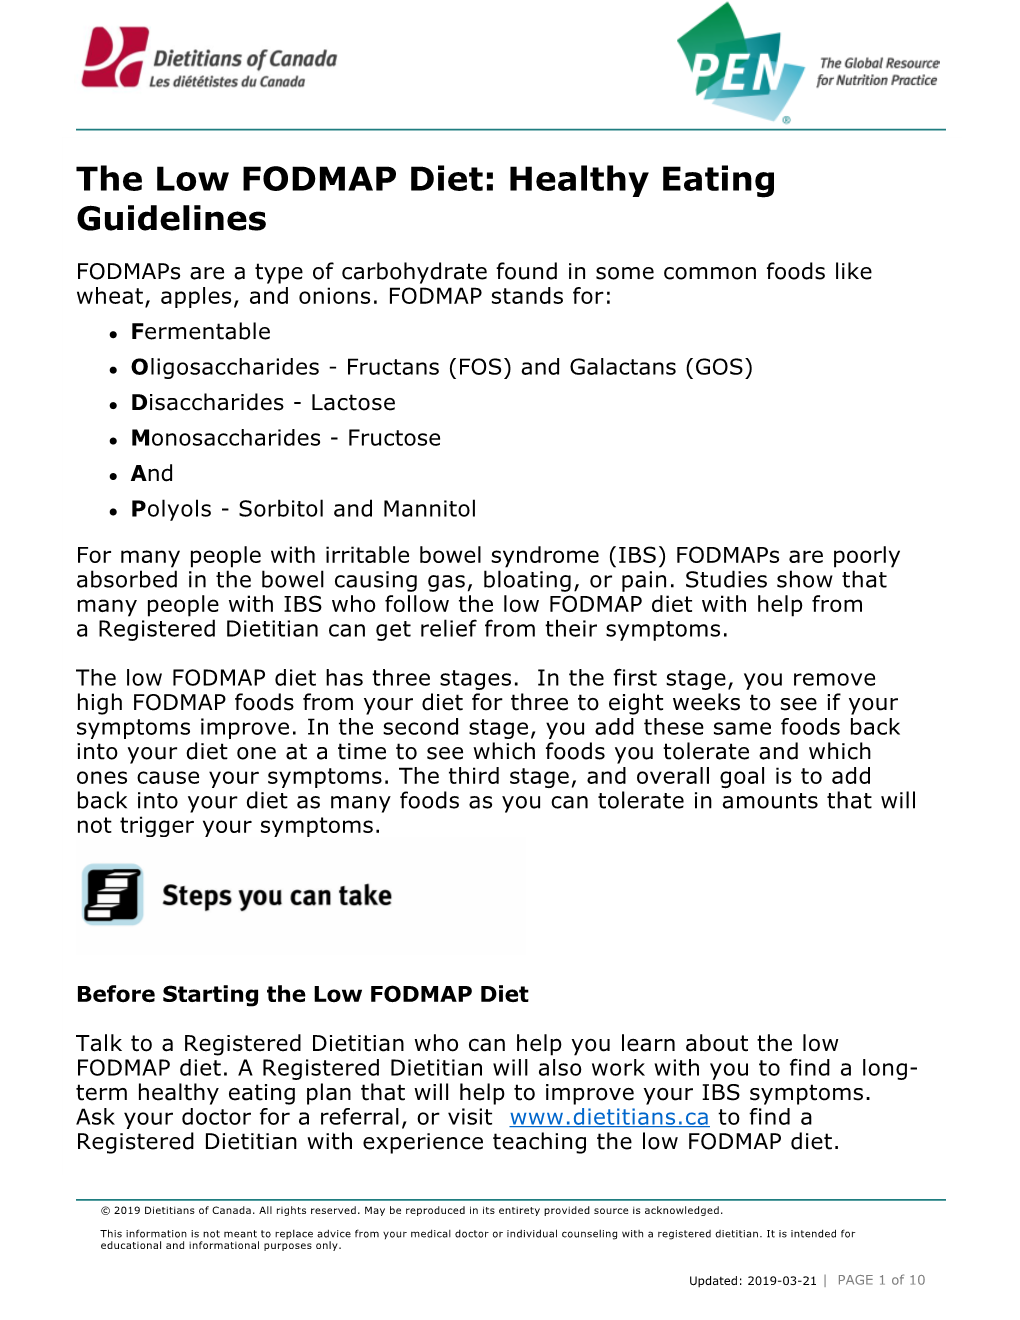 The Low FODMAP Diet: Healthy Eating Guidelines